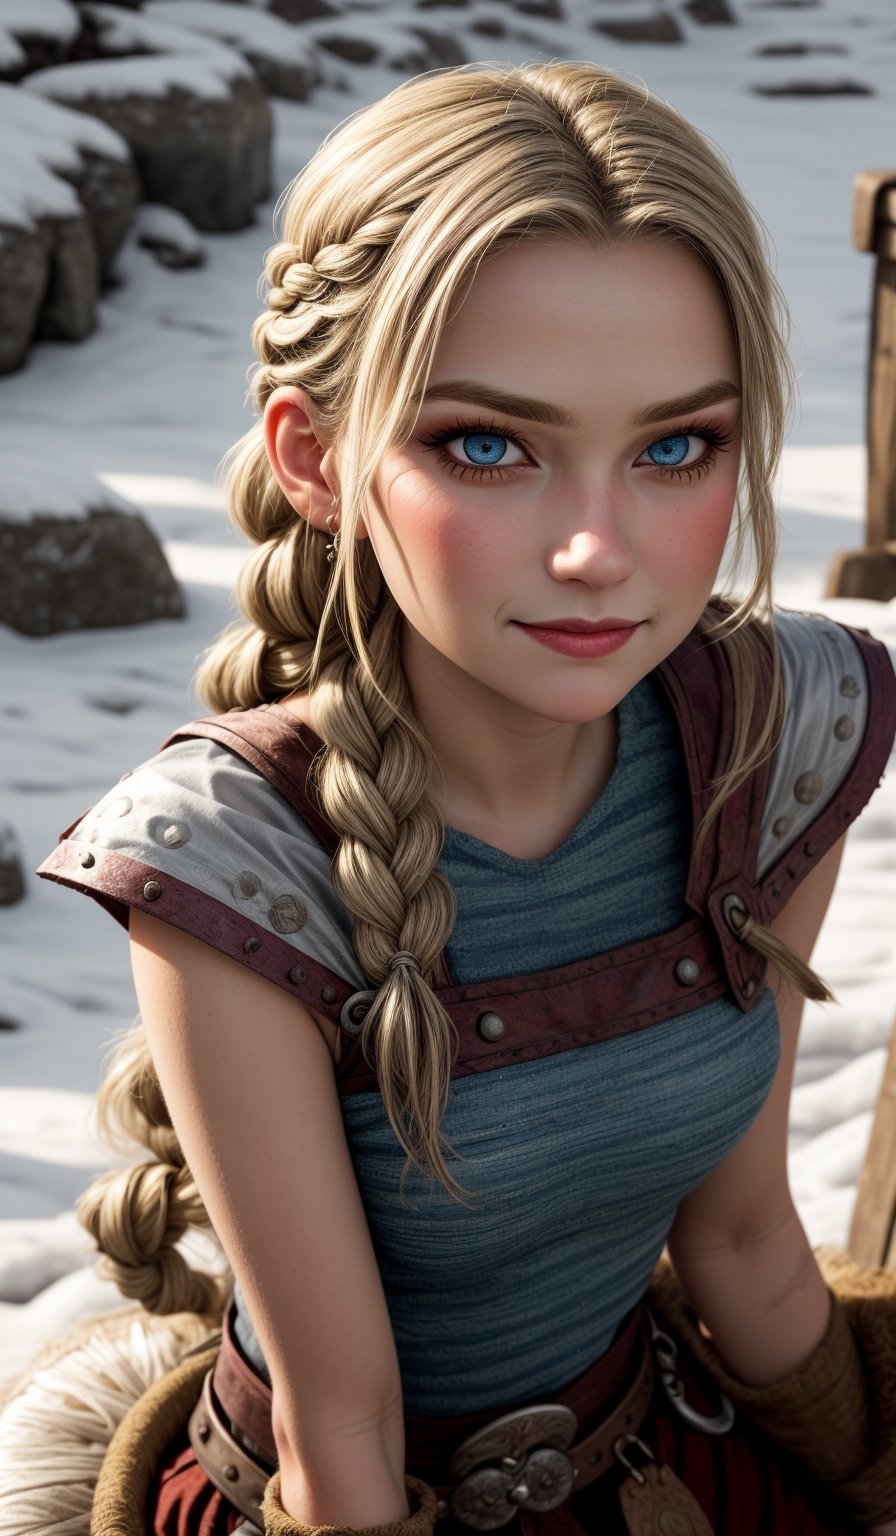 Create a softened depiction of a Viking girl, dressed in a medieval Viking clothing with wild braided hair. blue grey eyes, natural-looking eyebrows, and a happy gentle downward gaze. Keep the overall makeup light, with a touch of foundation for a soft and natural appearance. The lips can be painted in a gentle, neutral tone, while the eyes receive a light touch of eyeshadow and eyeliner for a more subdued effect. Strive for a sweet and approachable look, maintaining the essence of a Viking maiden appearance with a milder and more charming touch,standing cowboy shot,Astrid Hofferson